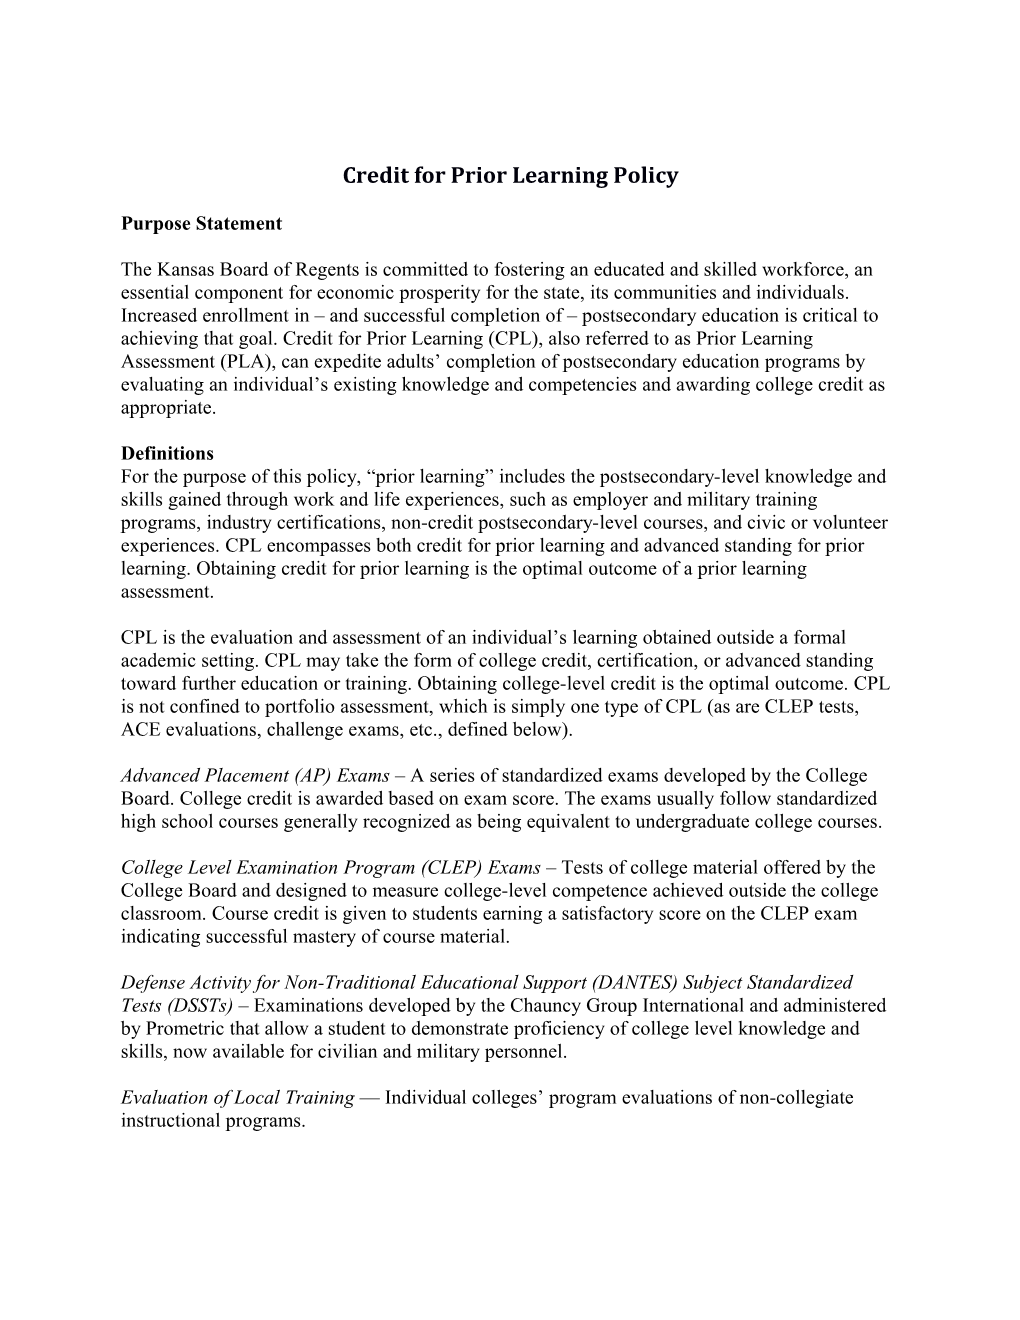 Credit for Prior Learning Policy